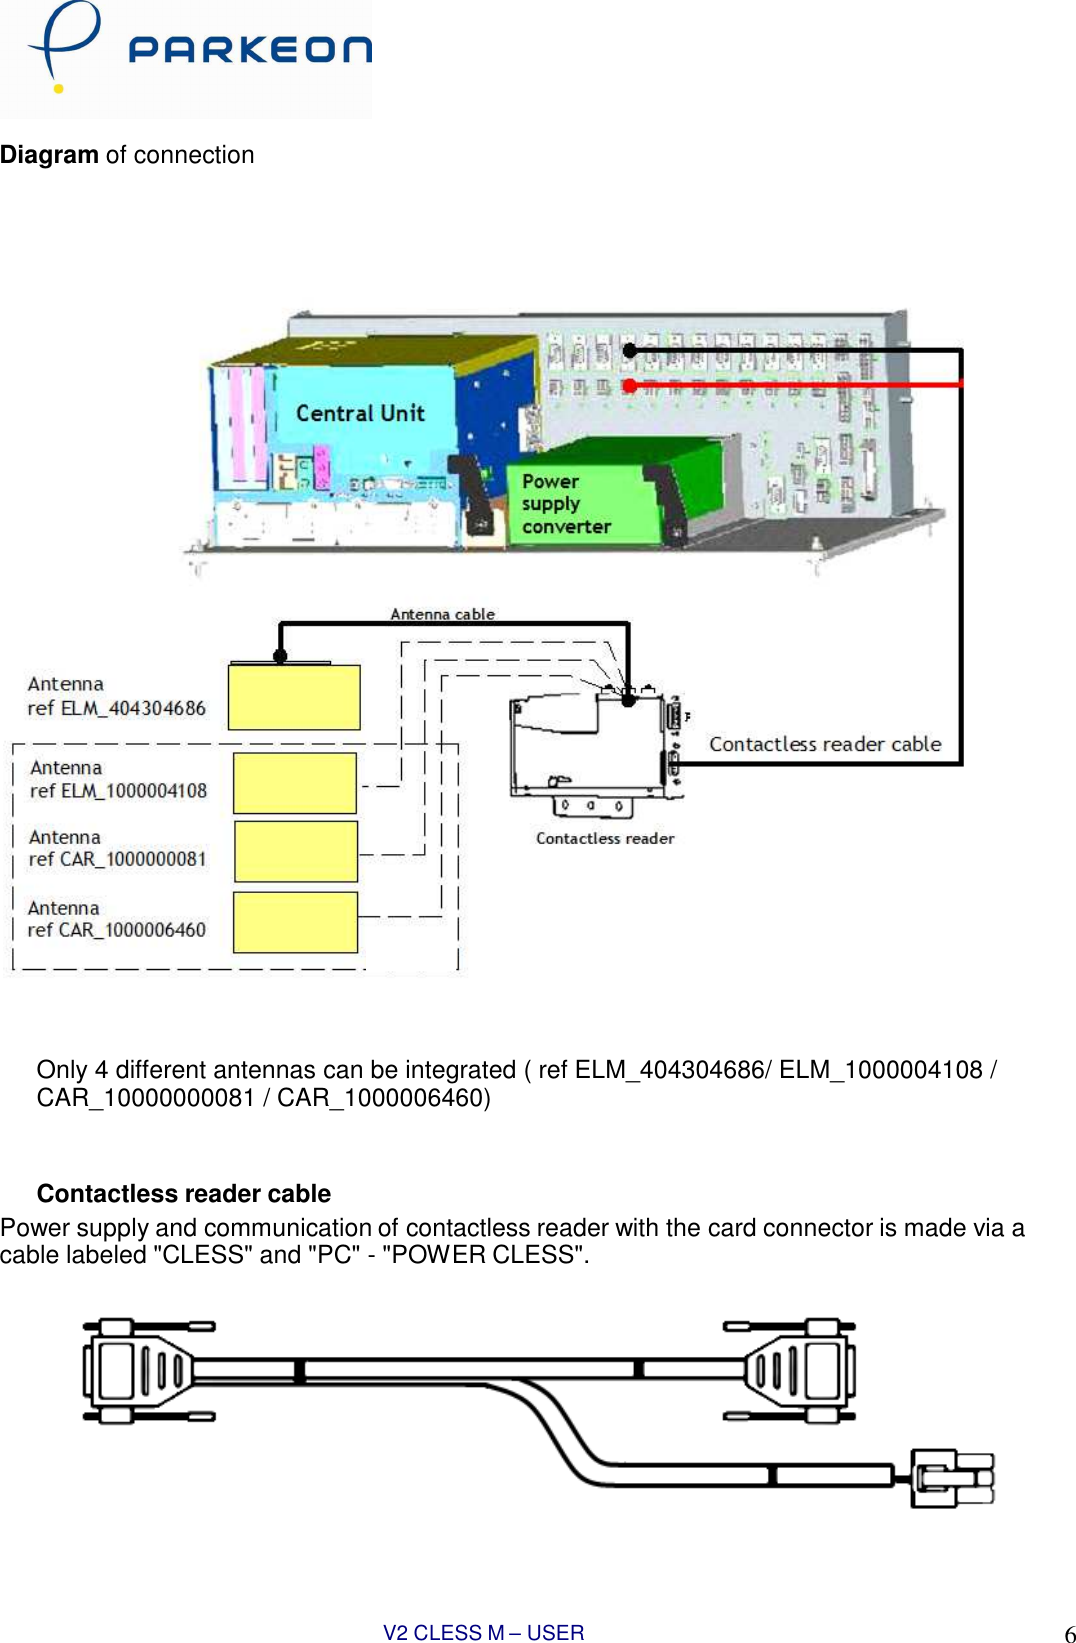 V2 CLESS M – USER MANUAL 6    Diagram of connection        cess      Only 4 different antennas can be integrated ( ref ELM_404304686/ ELM_1000004108 / CAR_10000000081 / CAR_1000006460)   Contactless reader cable Power supply and communication of contactless reader with the card connector is made via a cable labeled &quot;CLESS&quot; and &quot;PC&quot; - &quot;POWER CLESS&quot;.       